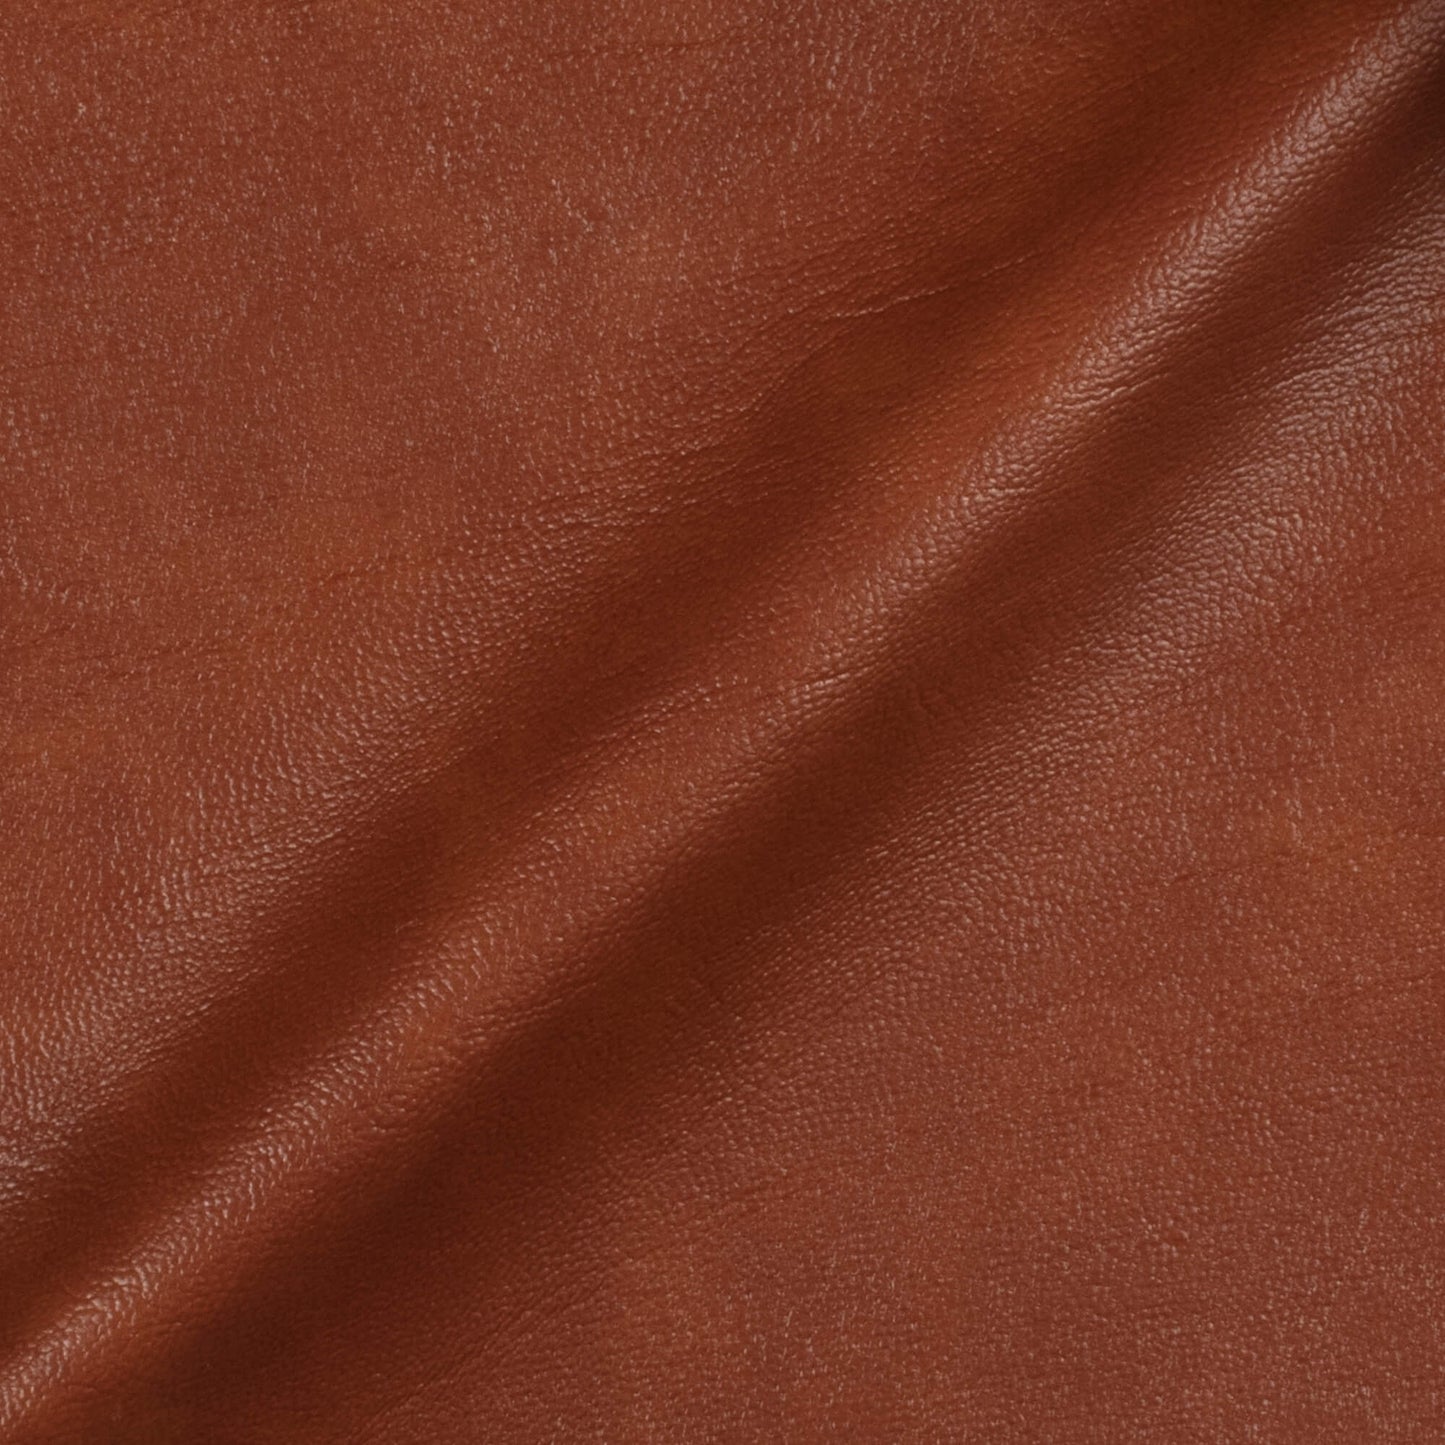 Cinnamon Brown Self Textured Exclusive Sofa Fabric (Width 54 Inches)